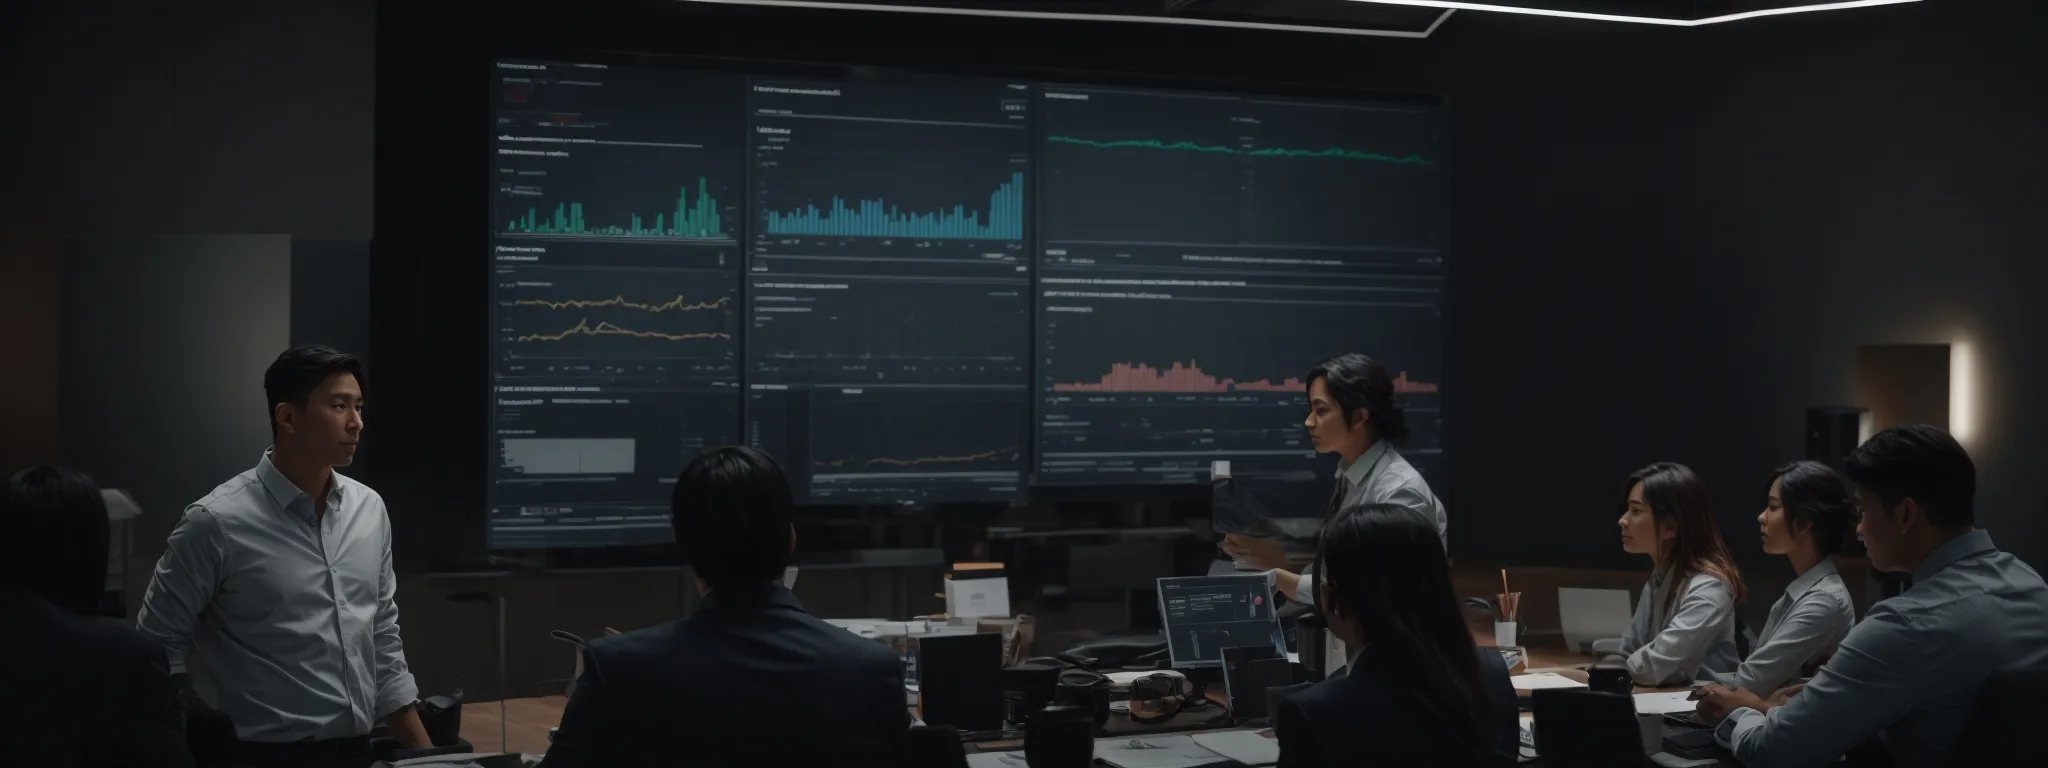 a team gathered around a large screen displays a dynamic dashboard with project timelines, marketing analytics, and a secure cloud storage interface.